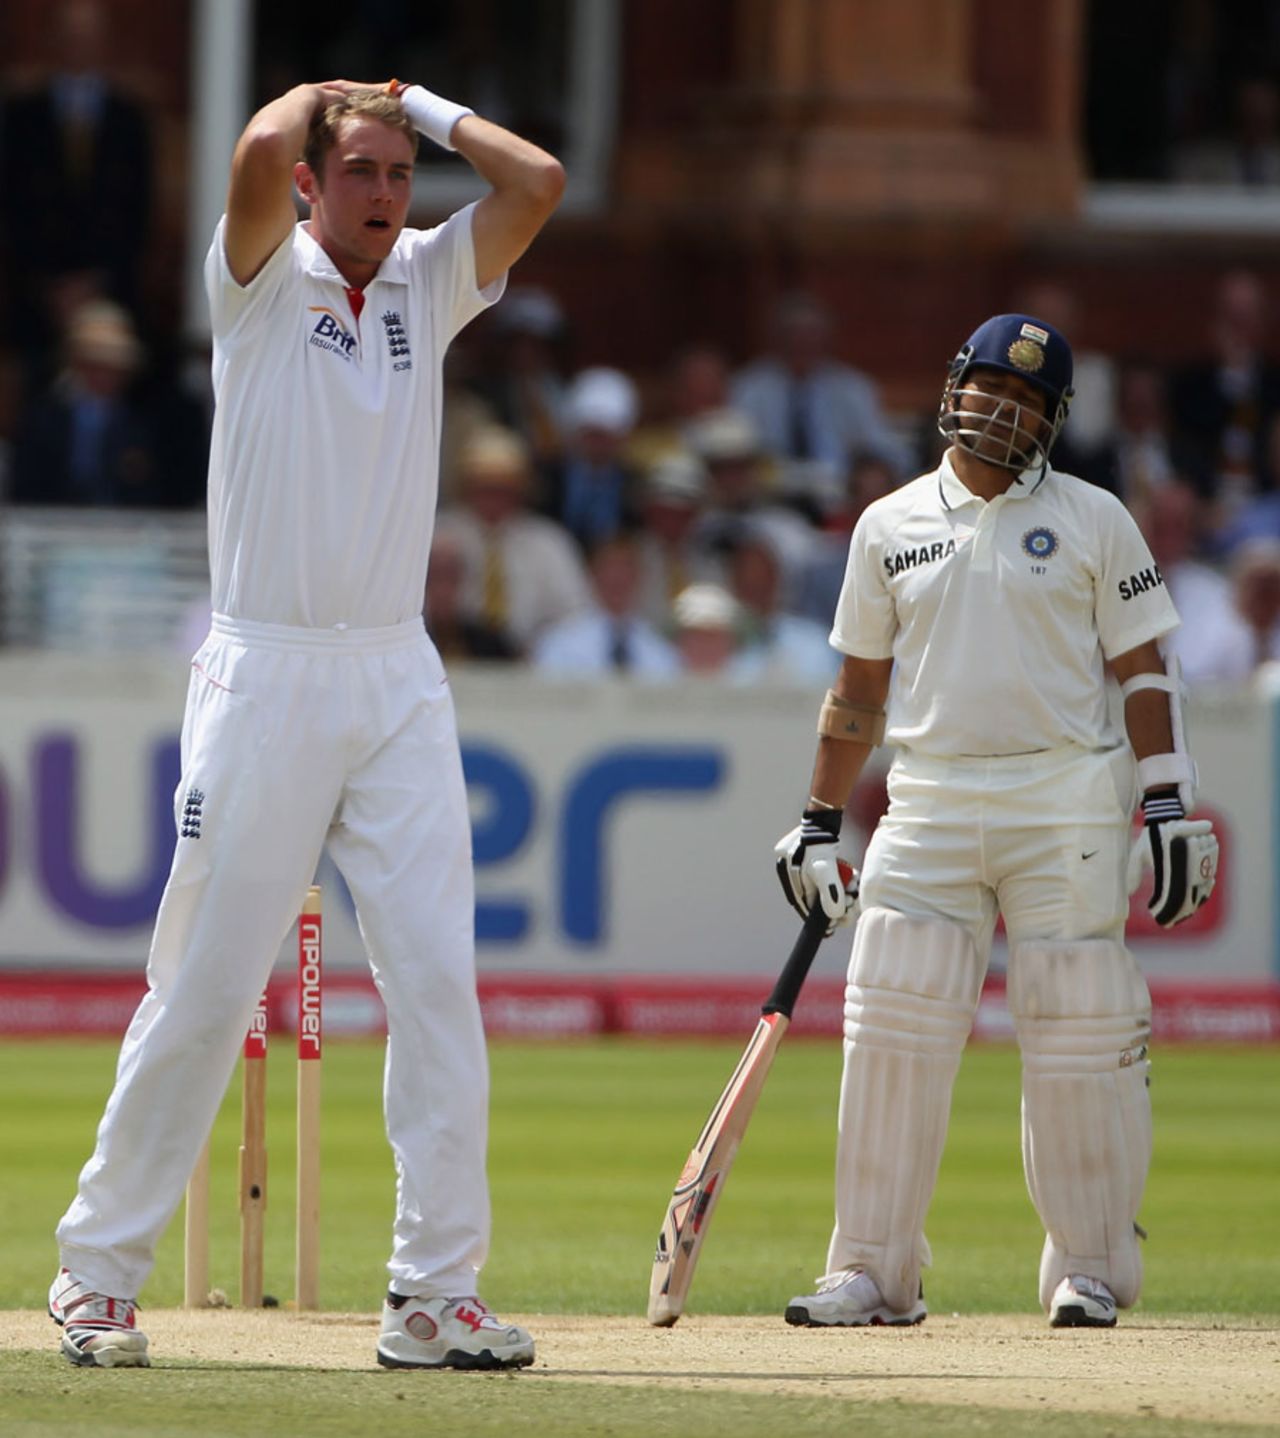 Stuart Broad stares in disbelief at the umpire after he had an lbw appeal turned down, England v India, 1st Test, Lord's, 5th day, July 25, 2011